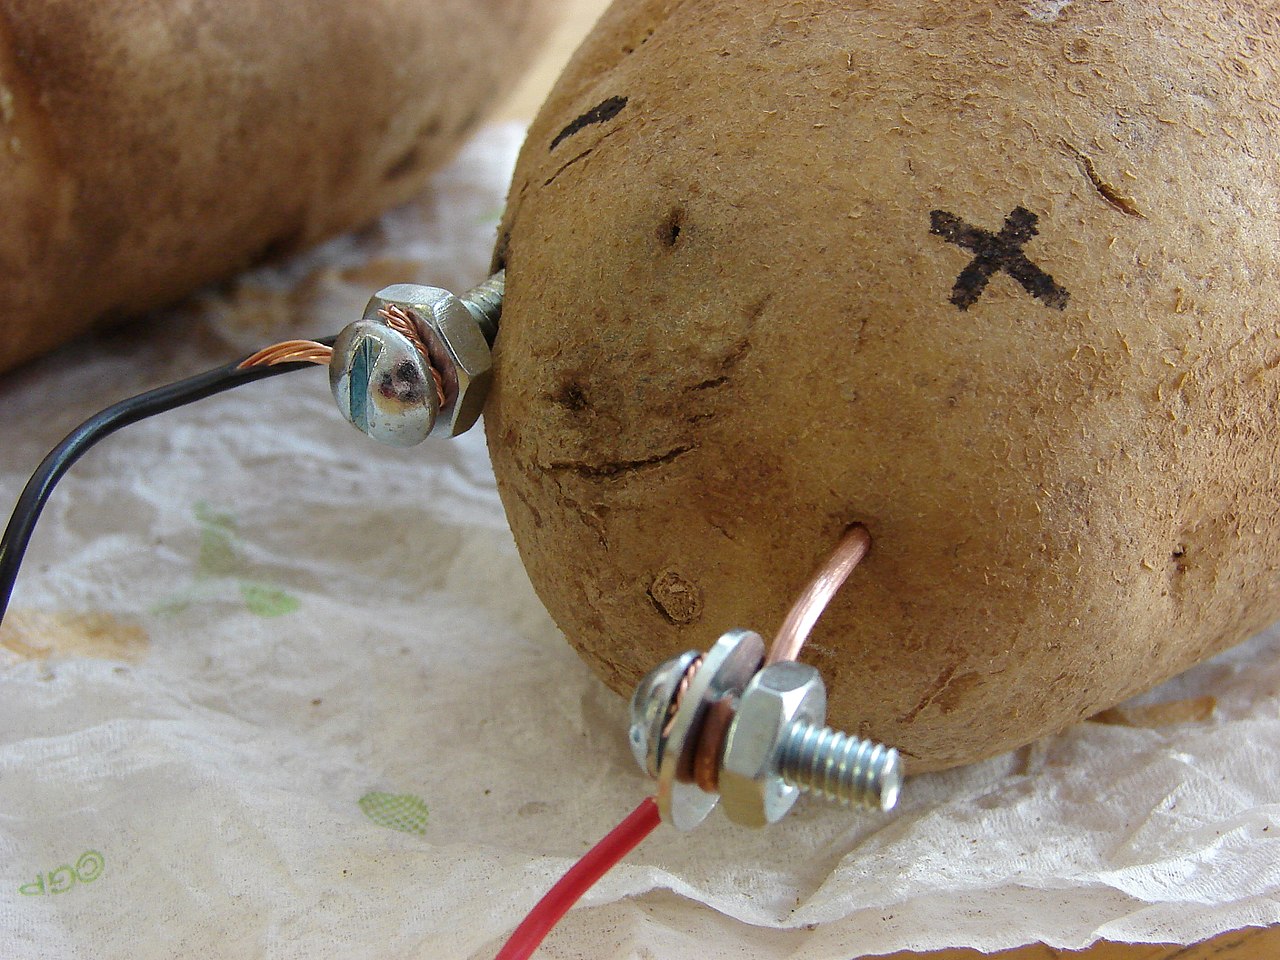 Stick a zinc-plated screw and a copper wire into the humble potato and you have a battery.